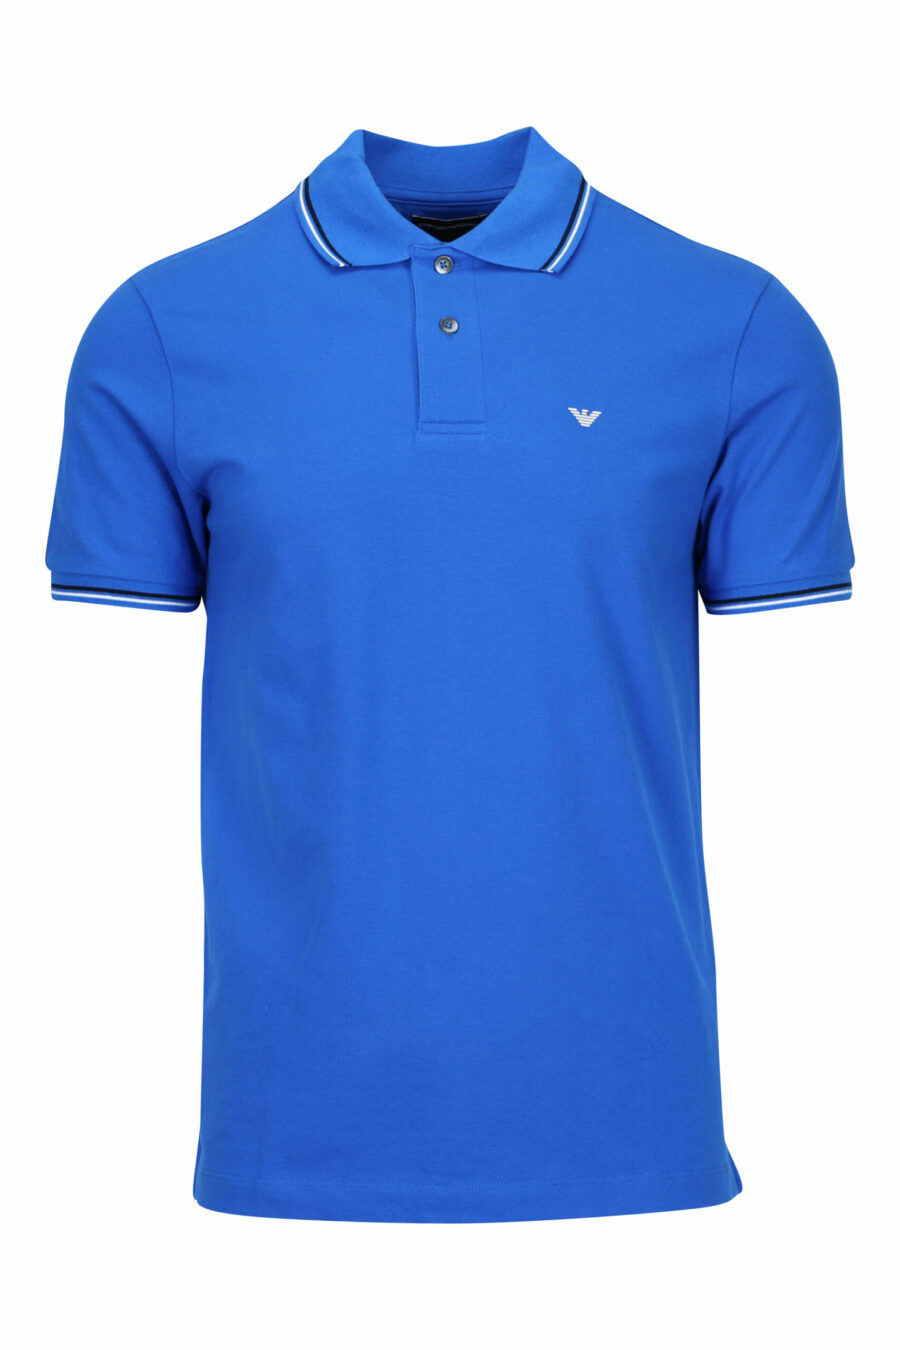 Blue knitted polo shirt with striped collar and mini eagle logo - 8056861421326 scaled